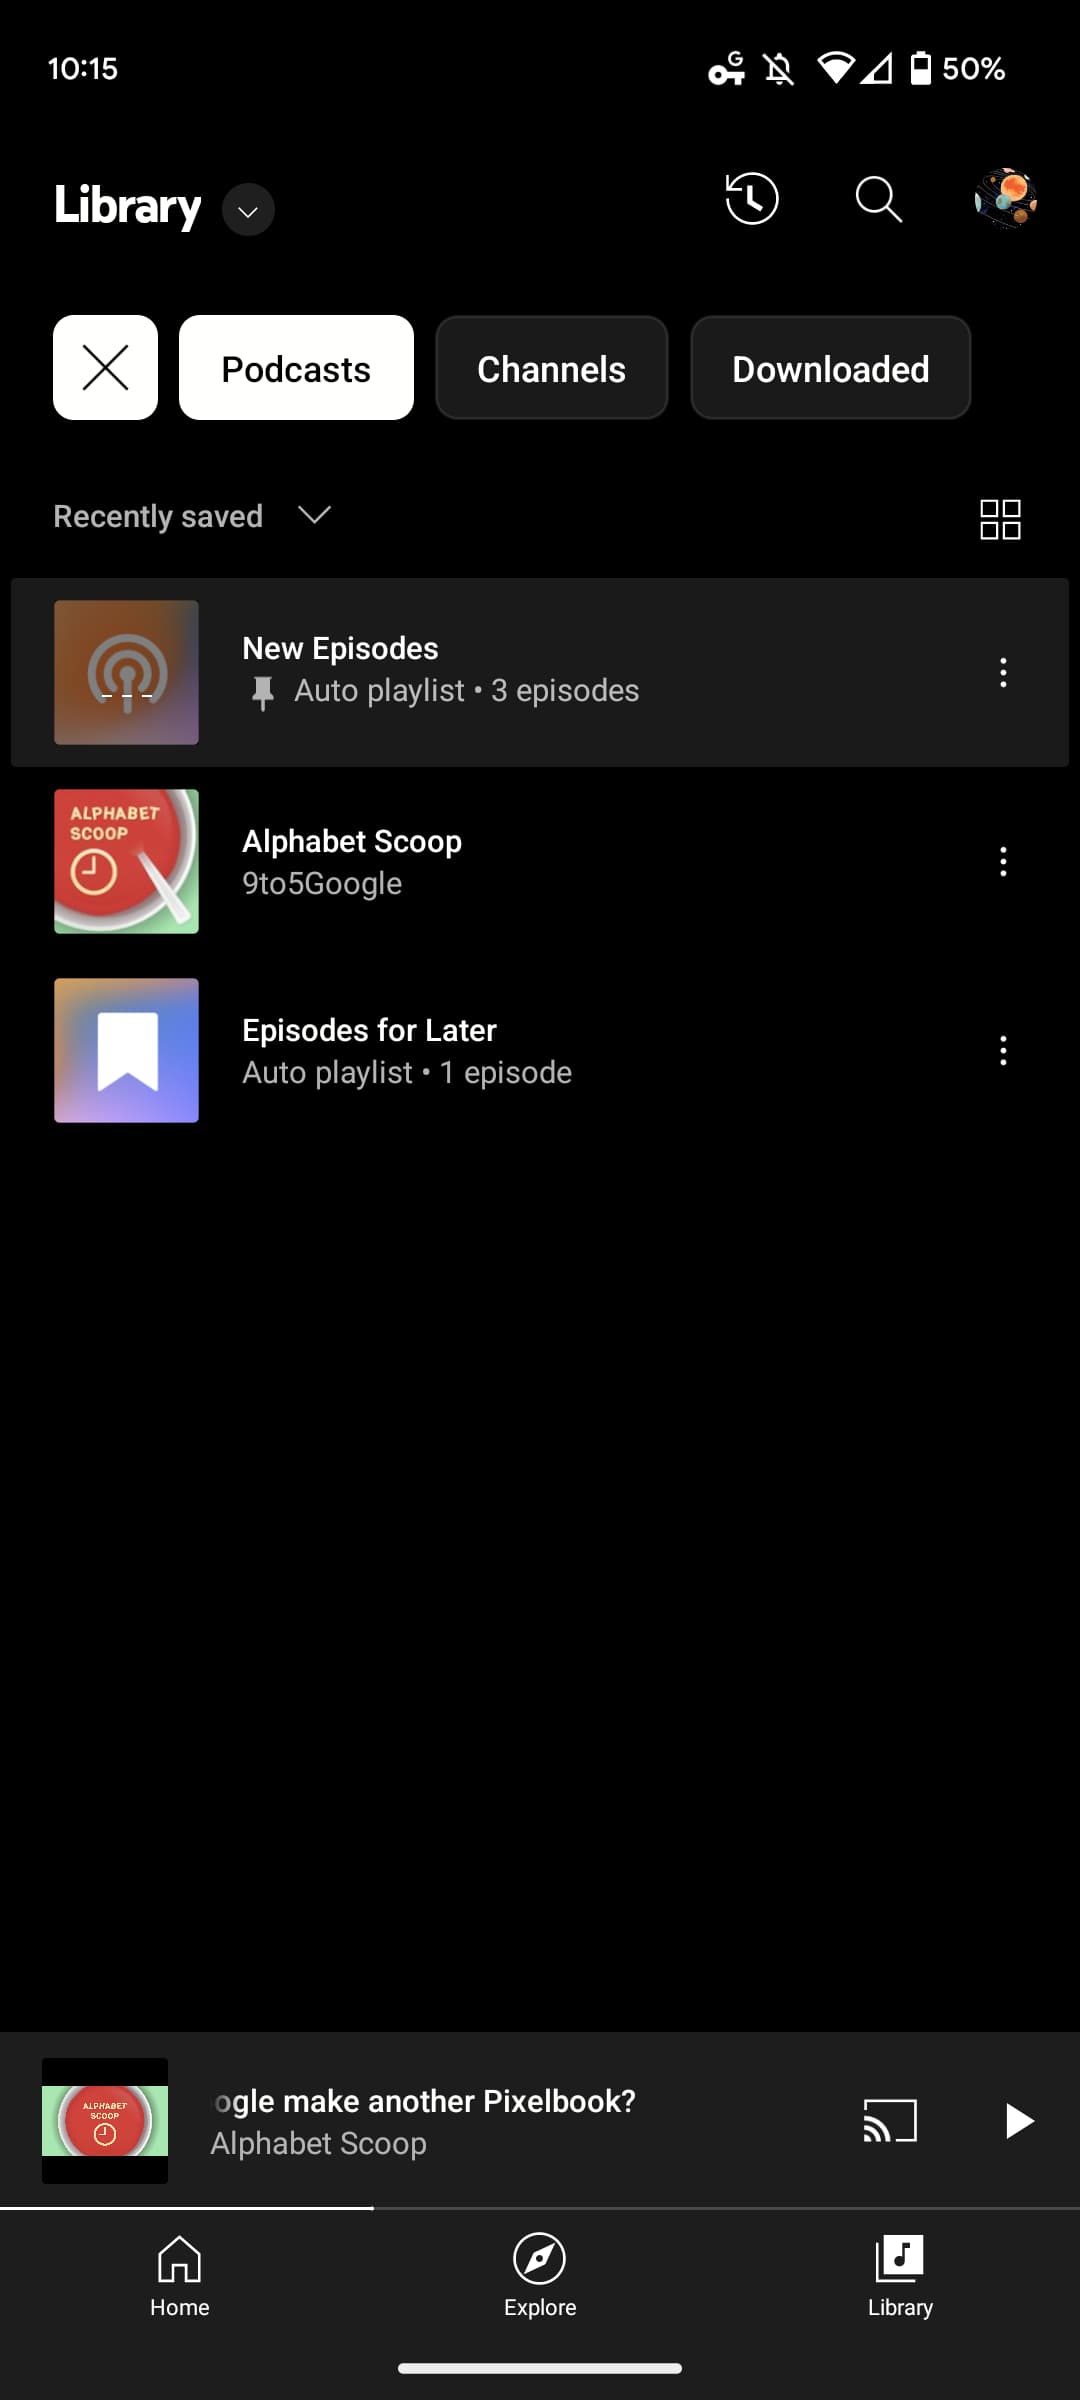 YouTube Music now supports Podcasts globally